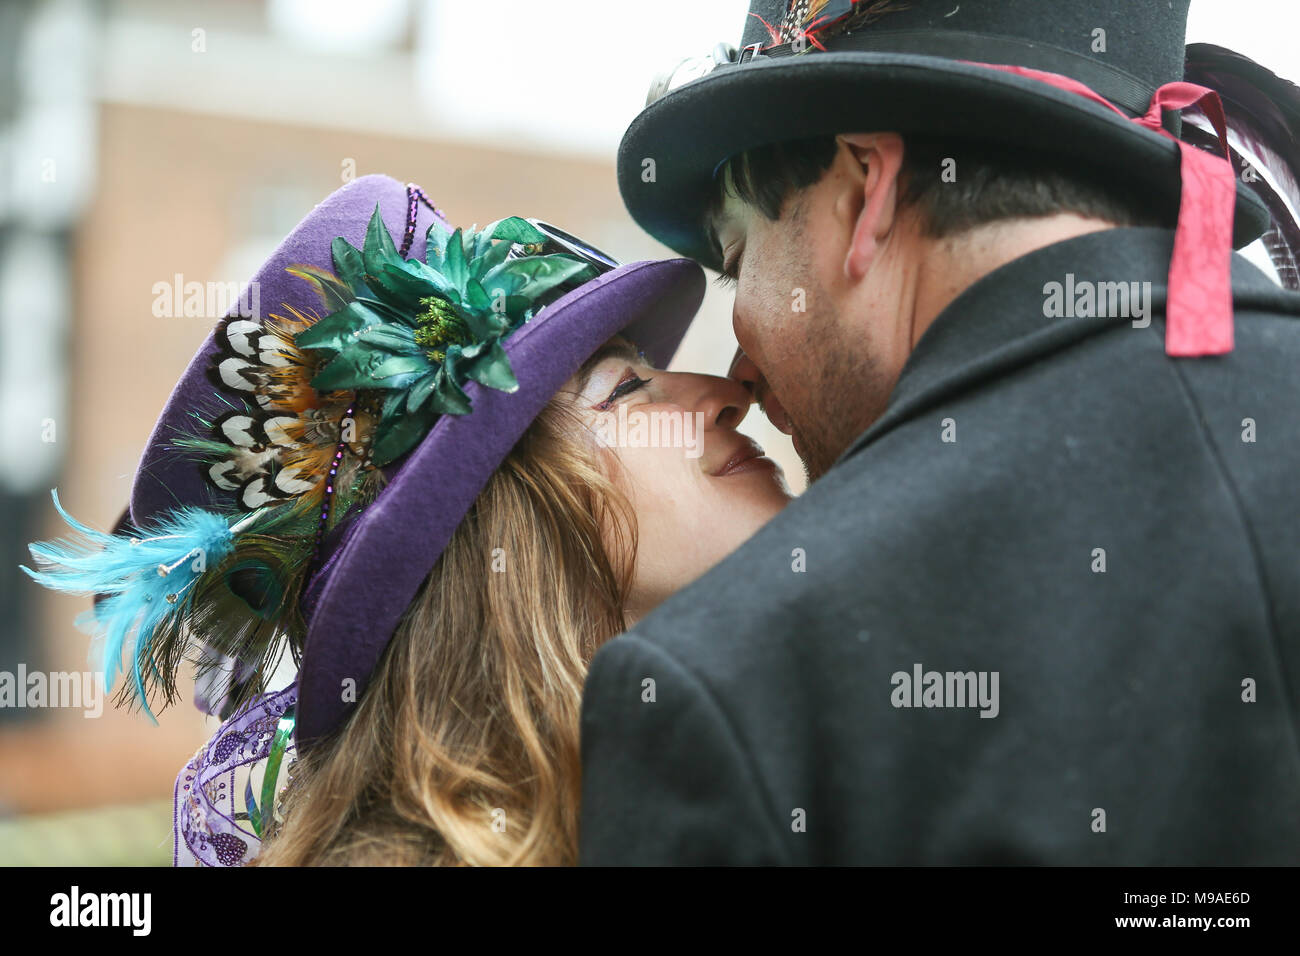 Two people almost kissing, dressed in steampunk style.Steampunk is a style of fashion that combines historical elements and anachronistic technology, often inspired by Edwardian science fiction. Peter Lopeman/Alamy Live News Stock Photo